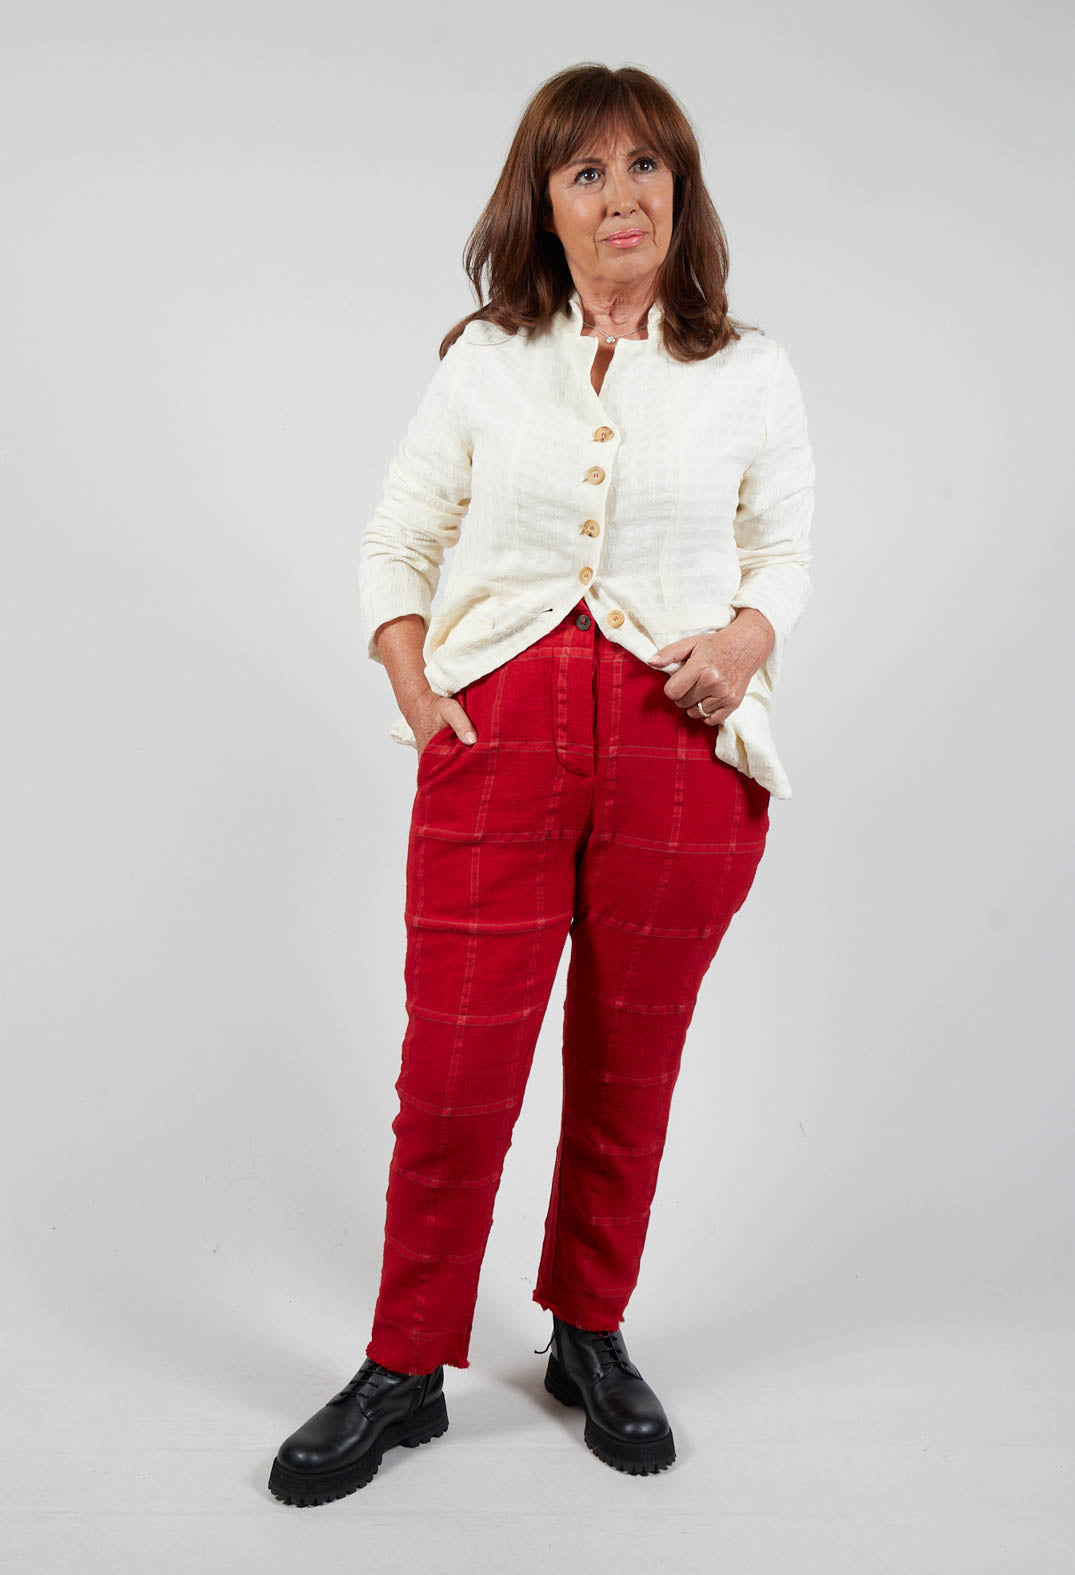 Pilade Trousers in Red Check